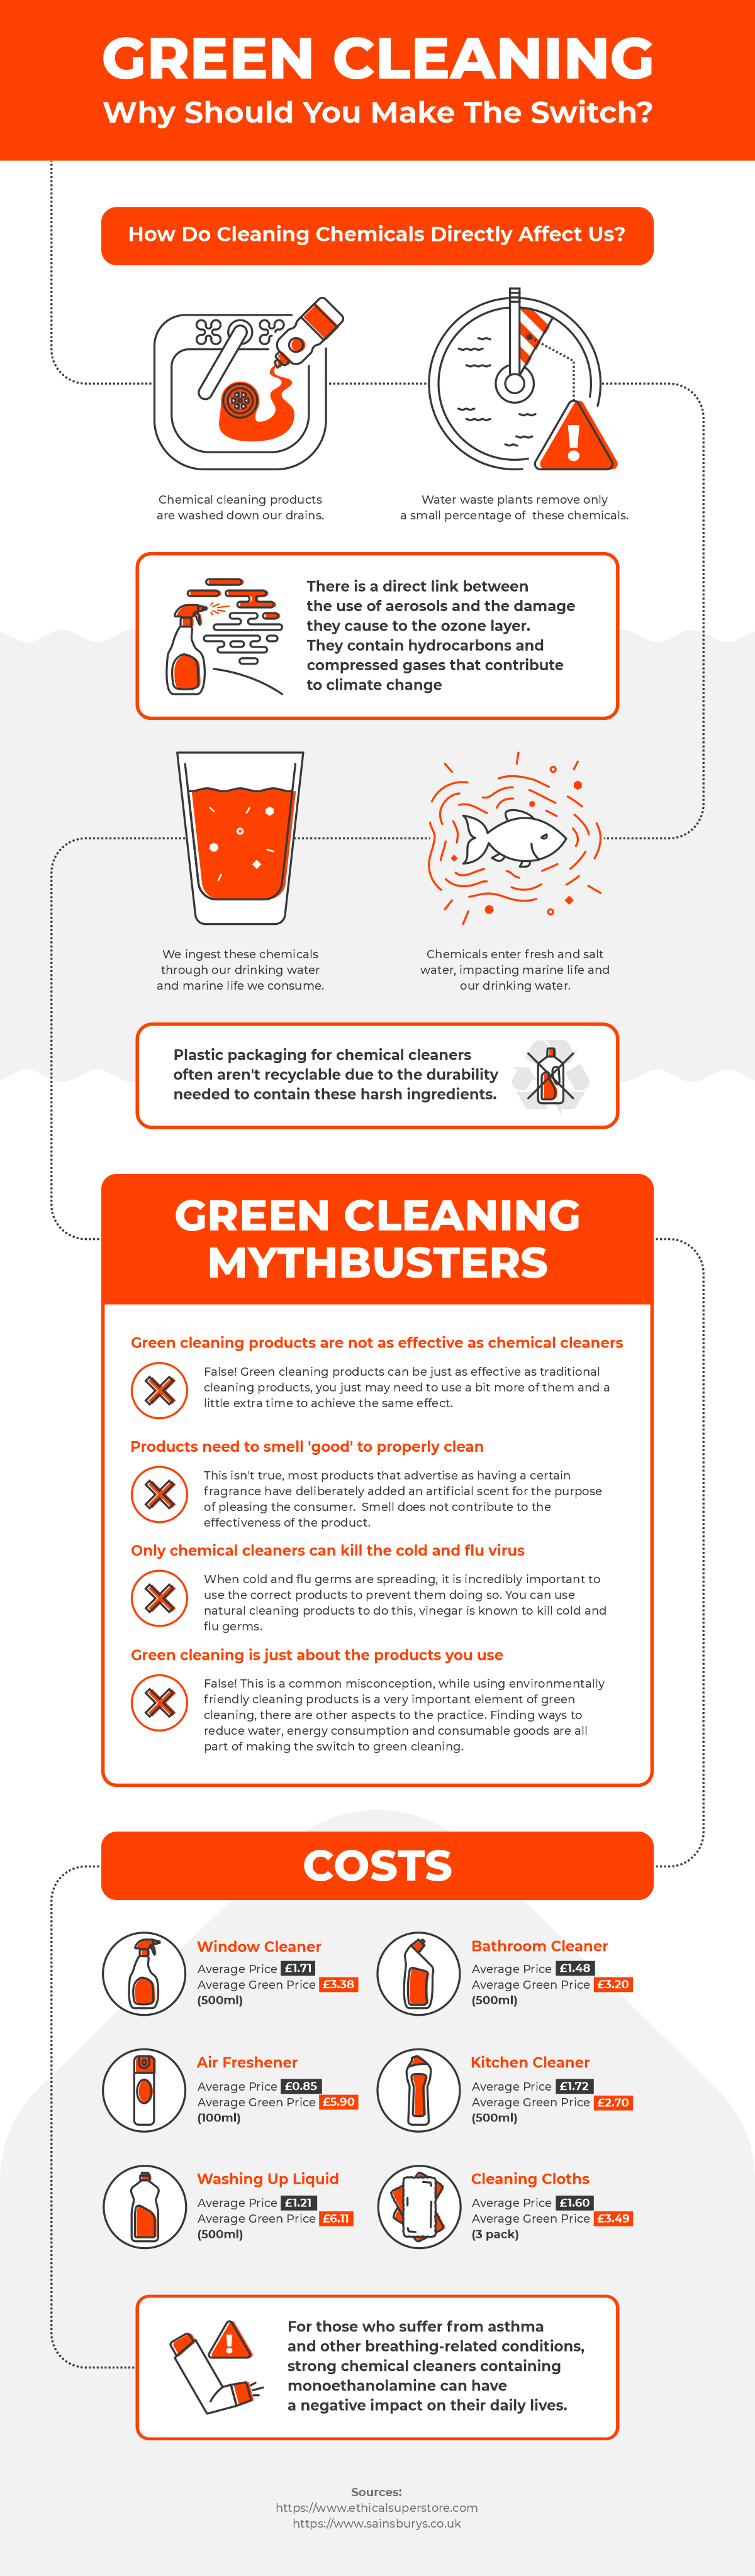 Switching To Green Cleaning